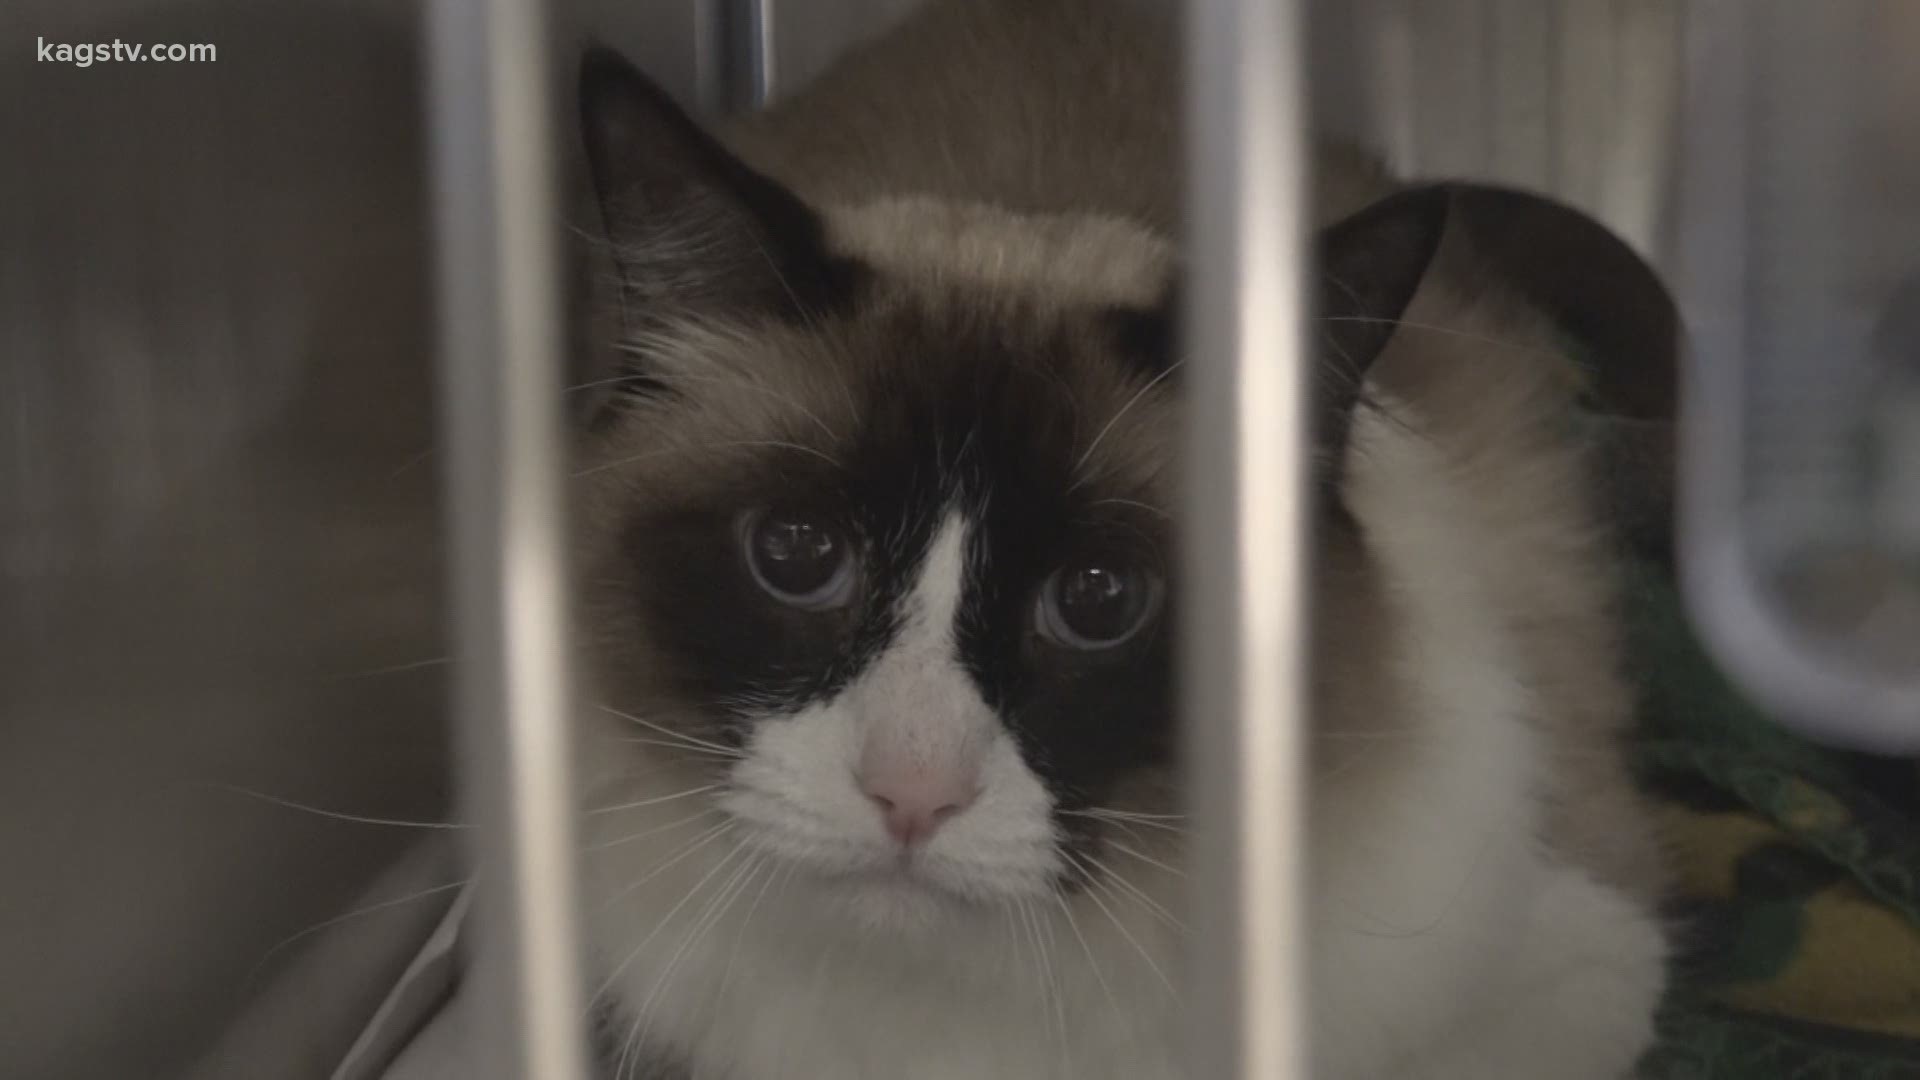 As the year wraps up, furry creatures at our local shelters continue their search for a forever home.